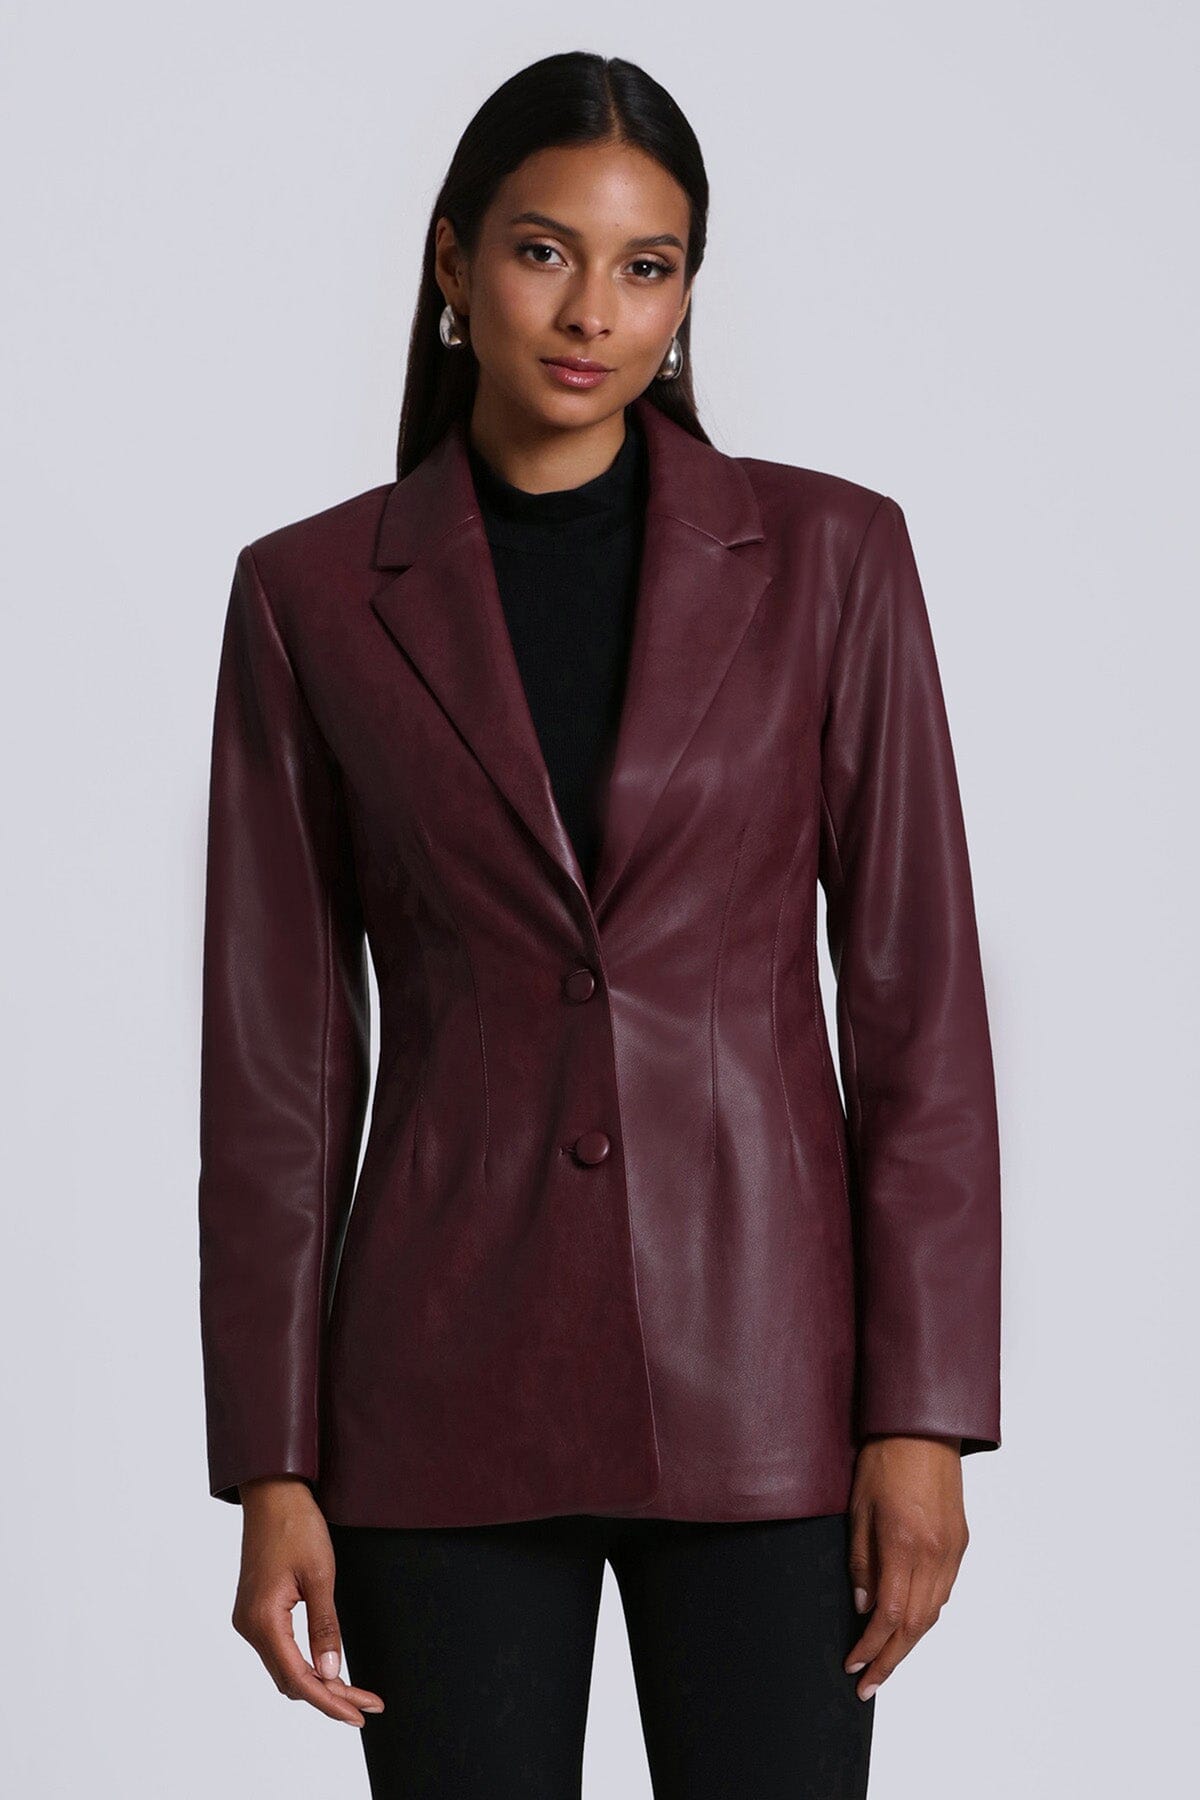 faux ever leather sculpted blazer jacket coat oxblood red - figure flattering designer fashion office to date night coats jackets blazers outerwear